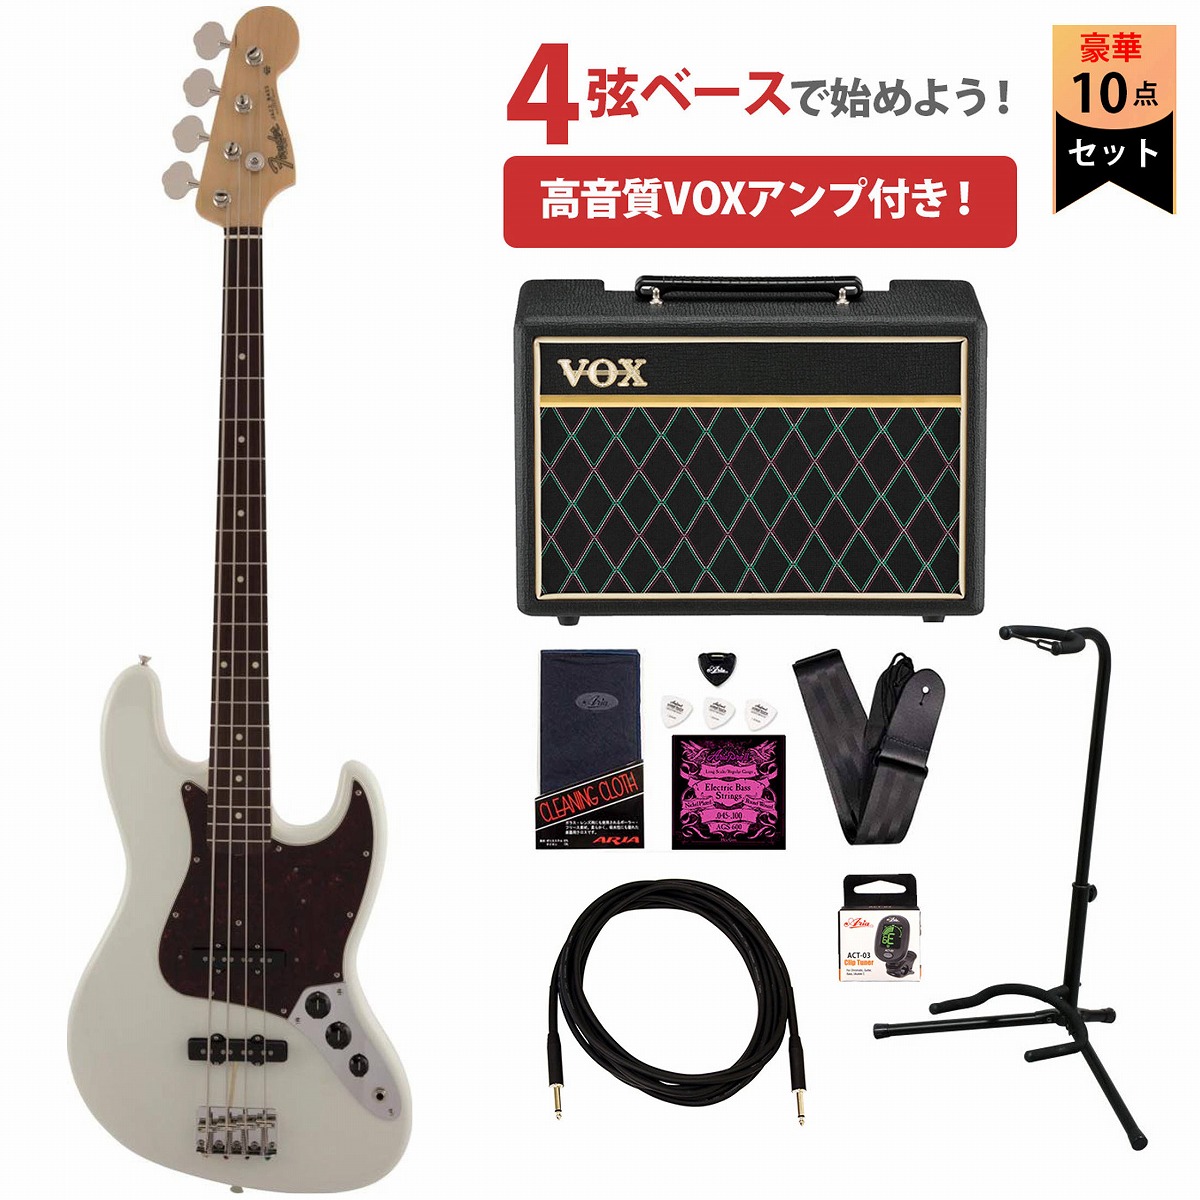 Fender   Made in Japan Traditional 60s Jazz Bass Rosewood Fingerboard Olympic WhiteVOXアンプ付属エレキベース初心者セット《高音質！BOSSケーブルプレゼント！  4957054217099》